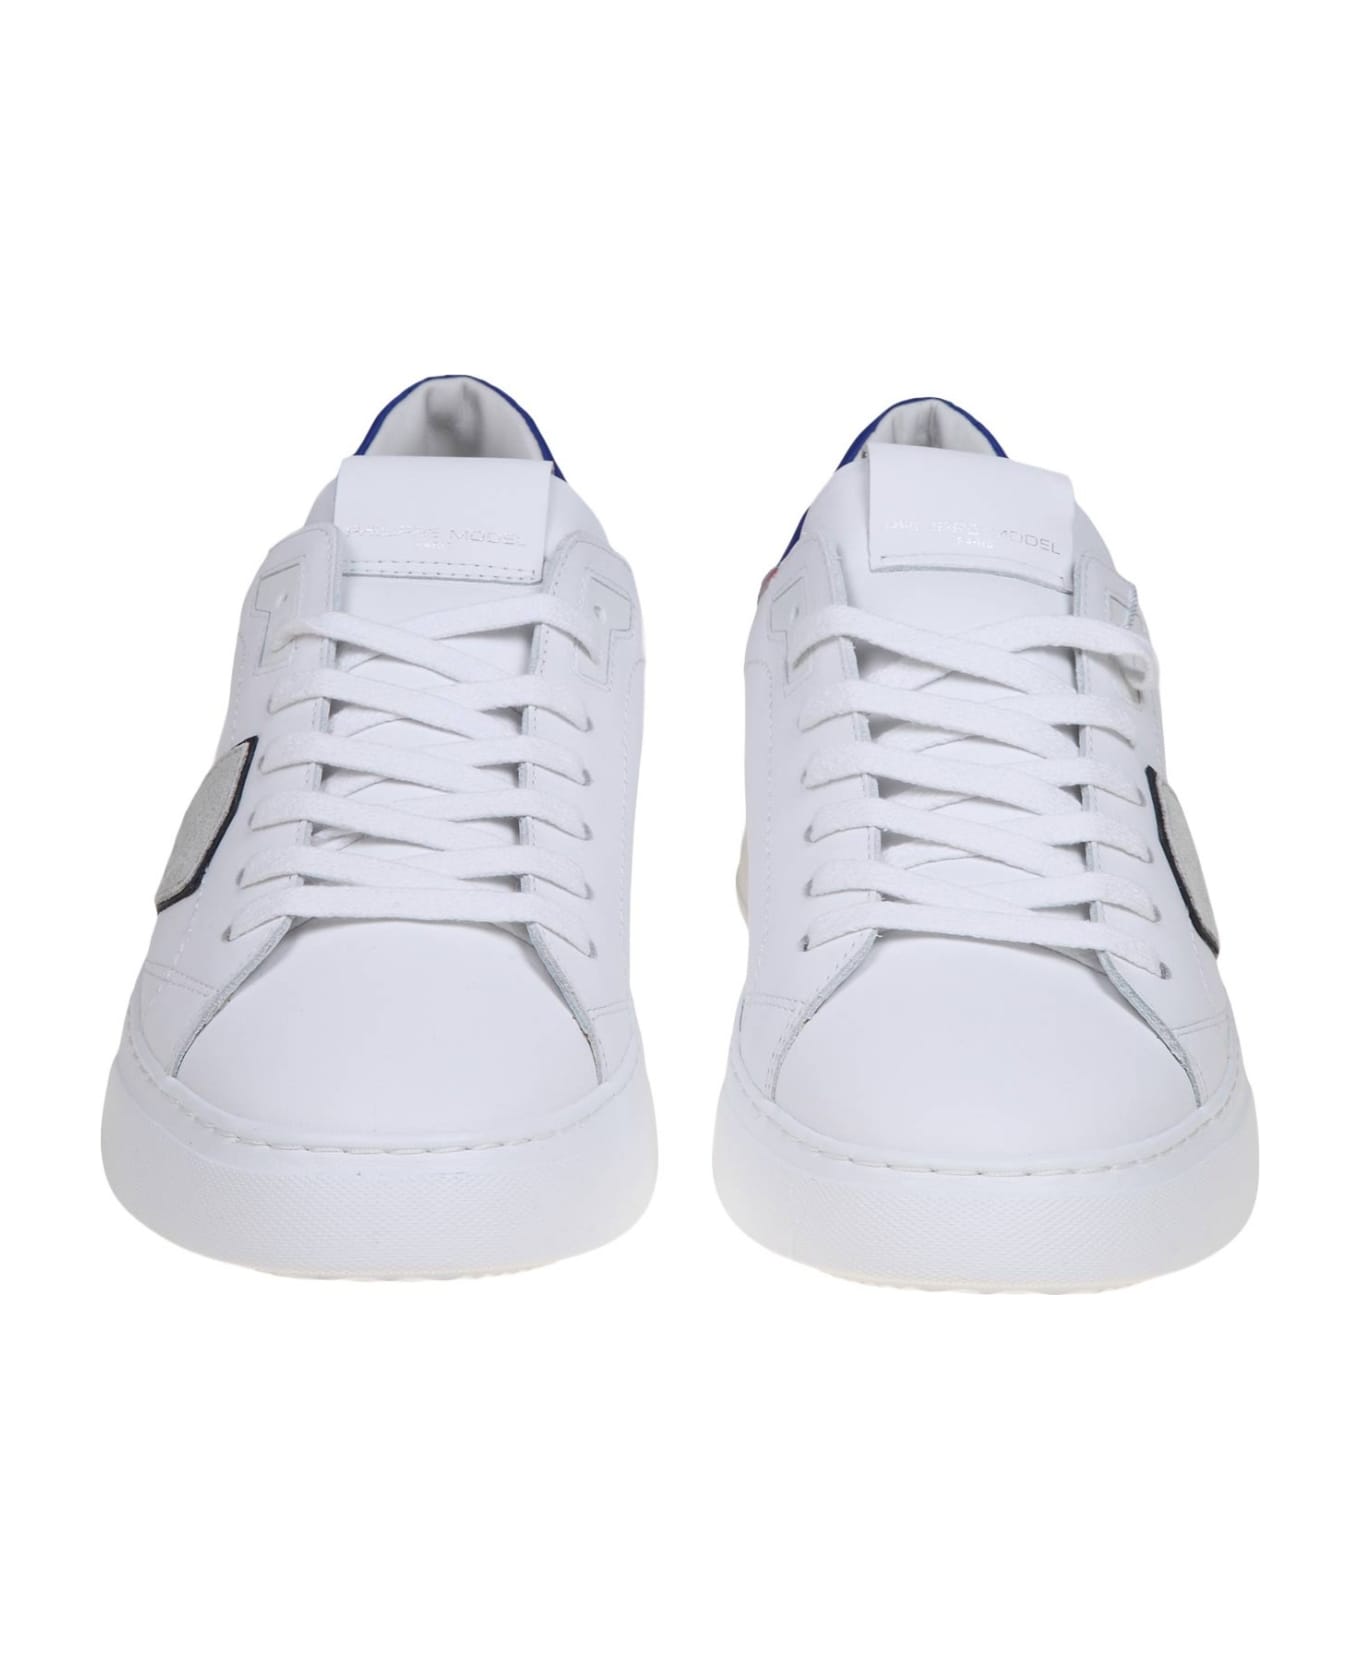 Philippe Model Temple Low Sneakers In White And Blue Leather - WHITE/BLUETTE